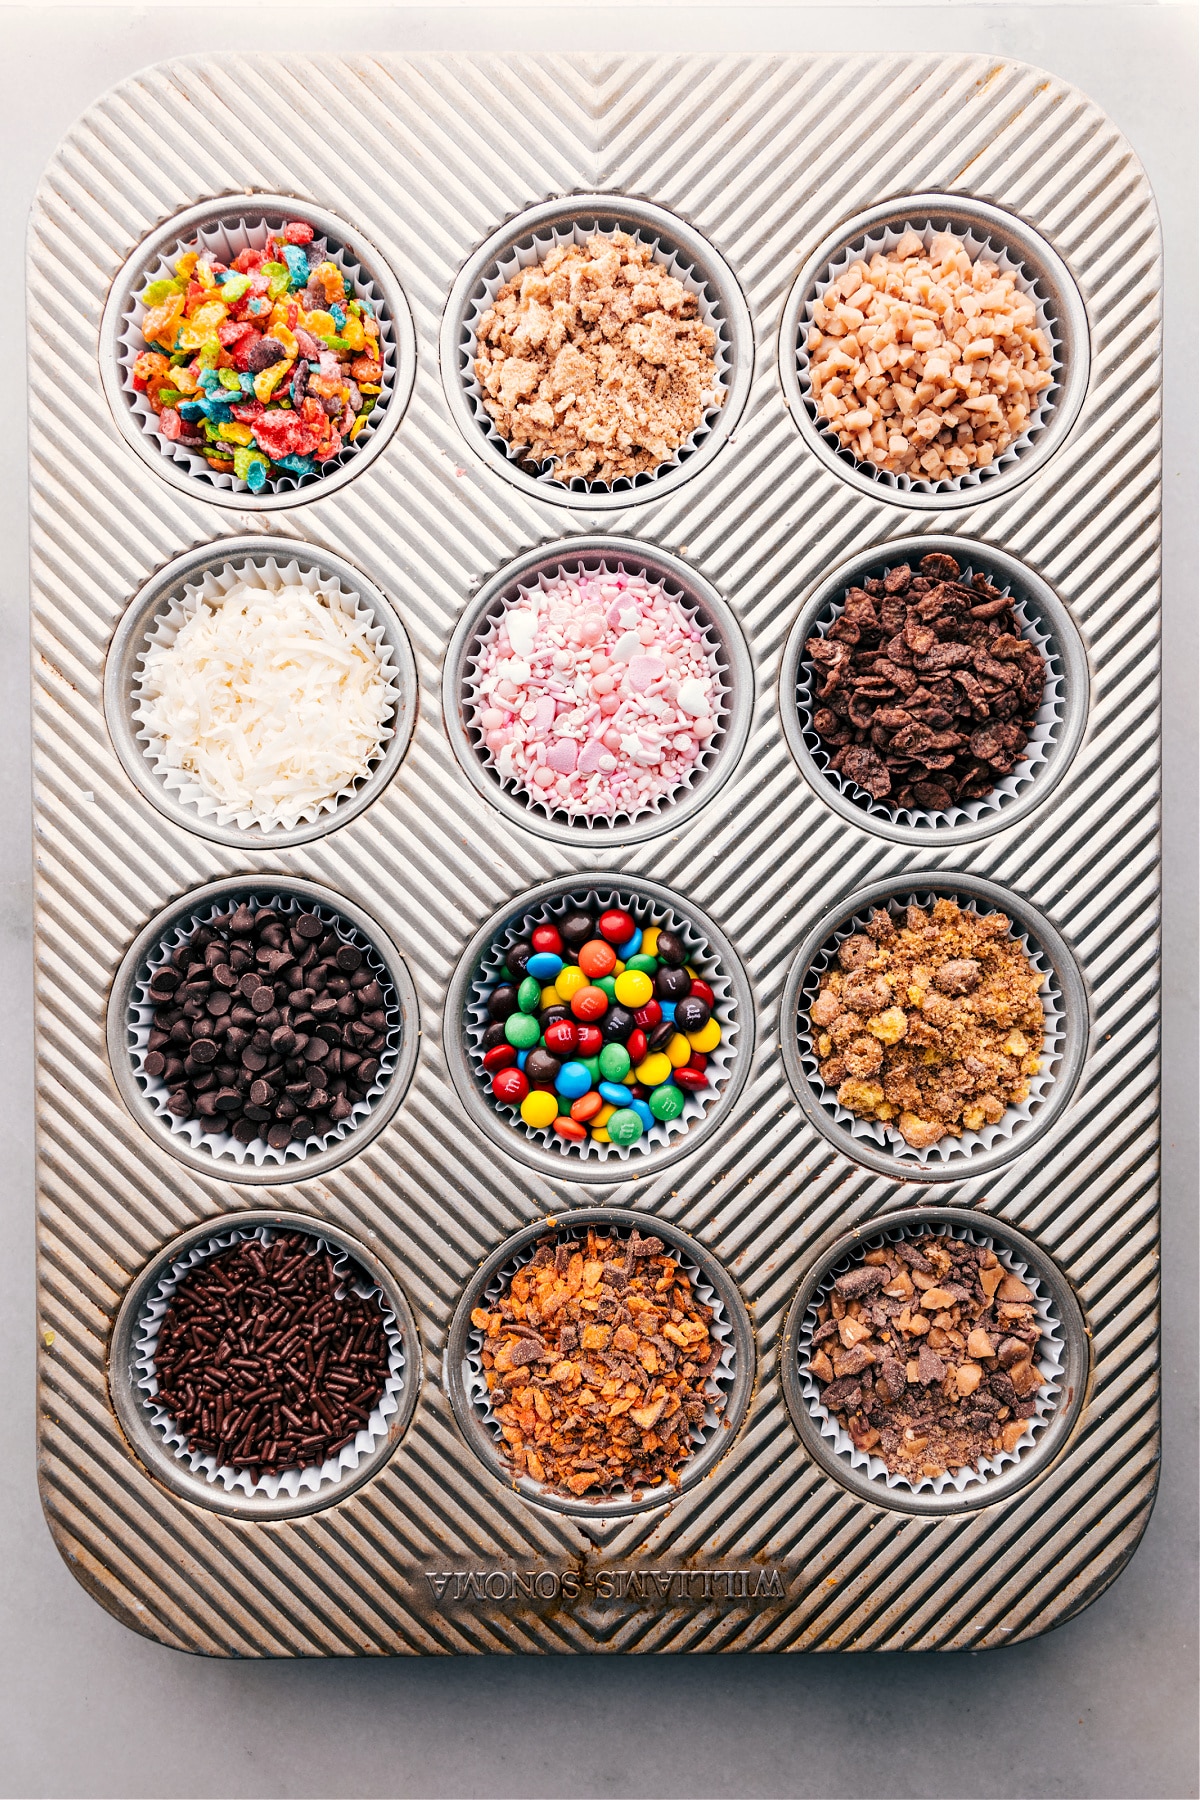 Image of a muffin pan with all the ingredients used to dip the strawberries for Chocolate-Covered Strawberry Dessert Bar in the various wells.